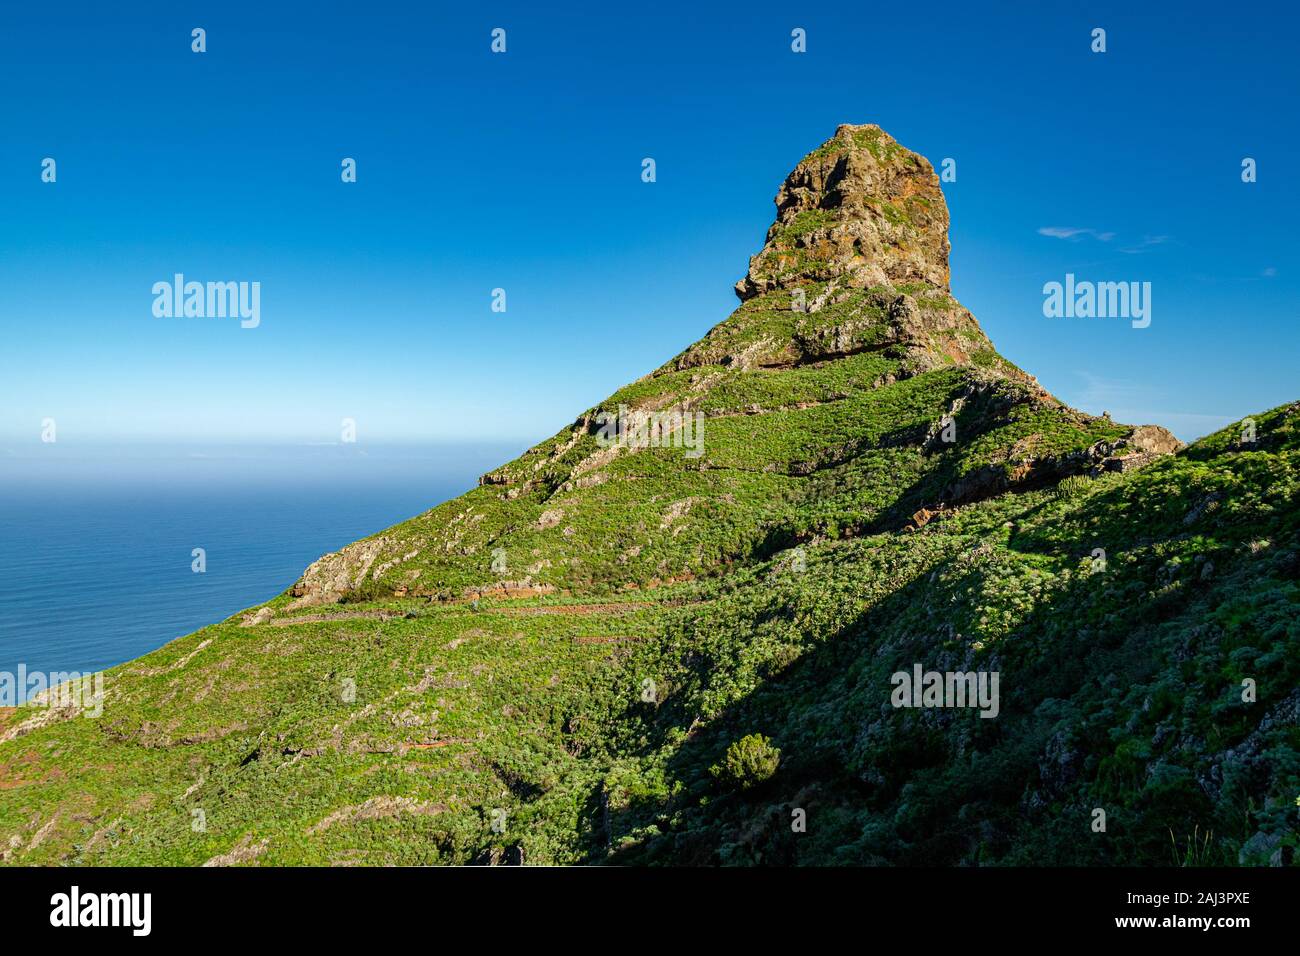 Roque de Taborno - one of the most iconic geological formations within the Macizo de Anaga mountain range, a Biosphere Reserve on Tenerife. Stock Photo